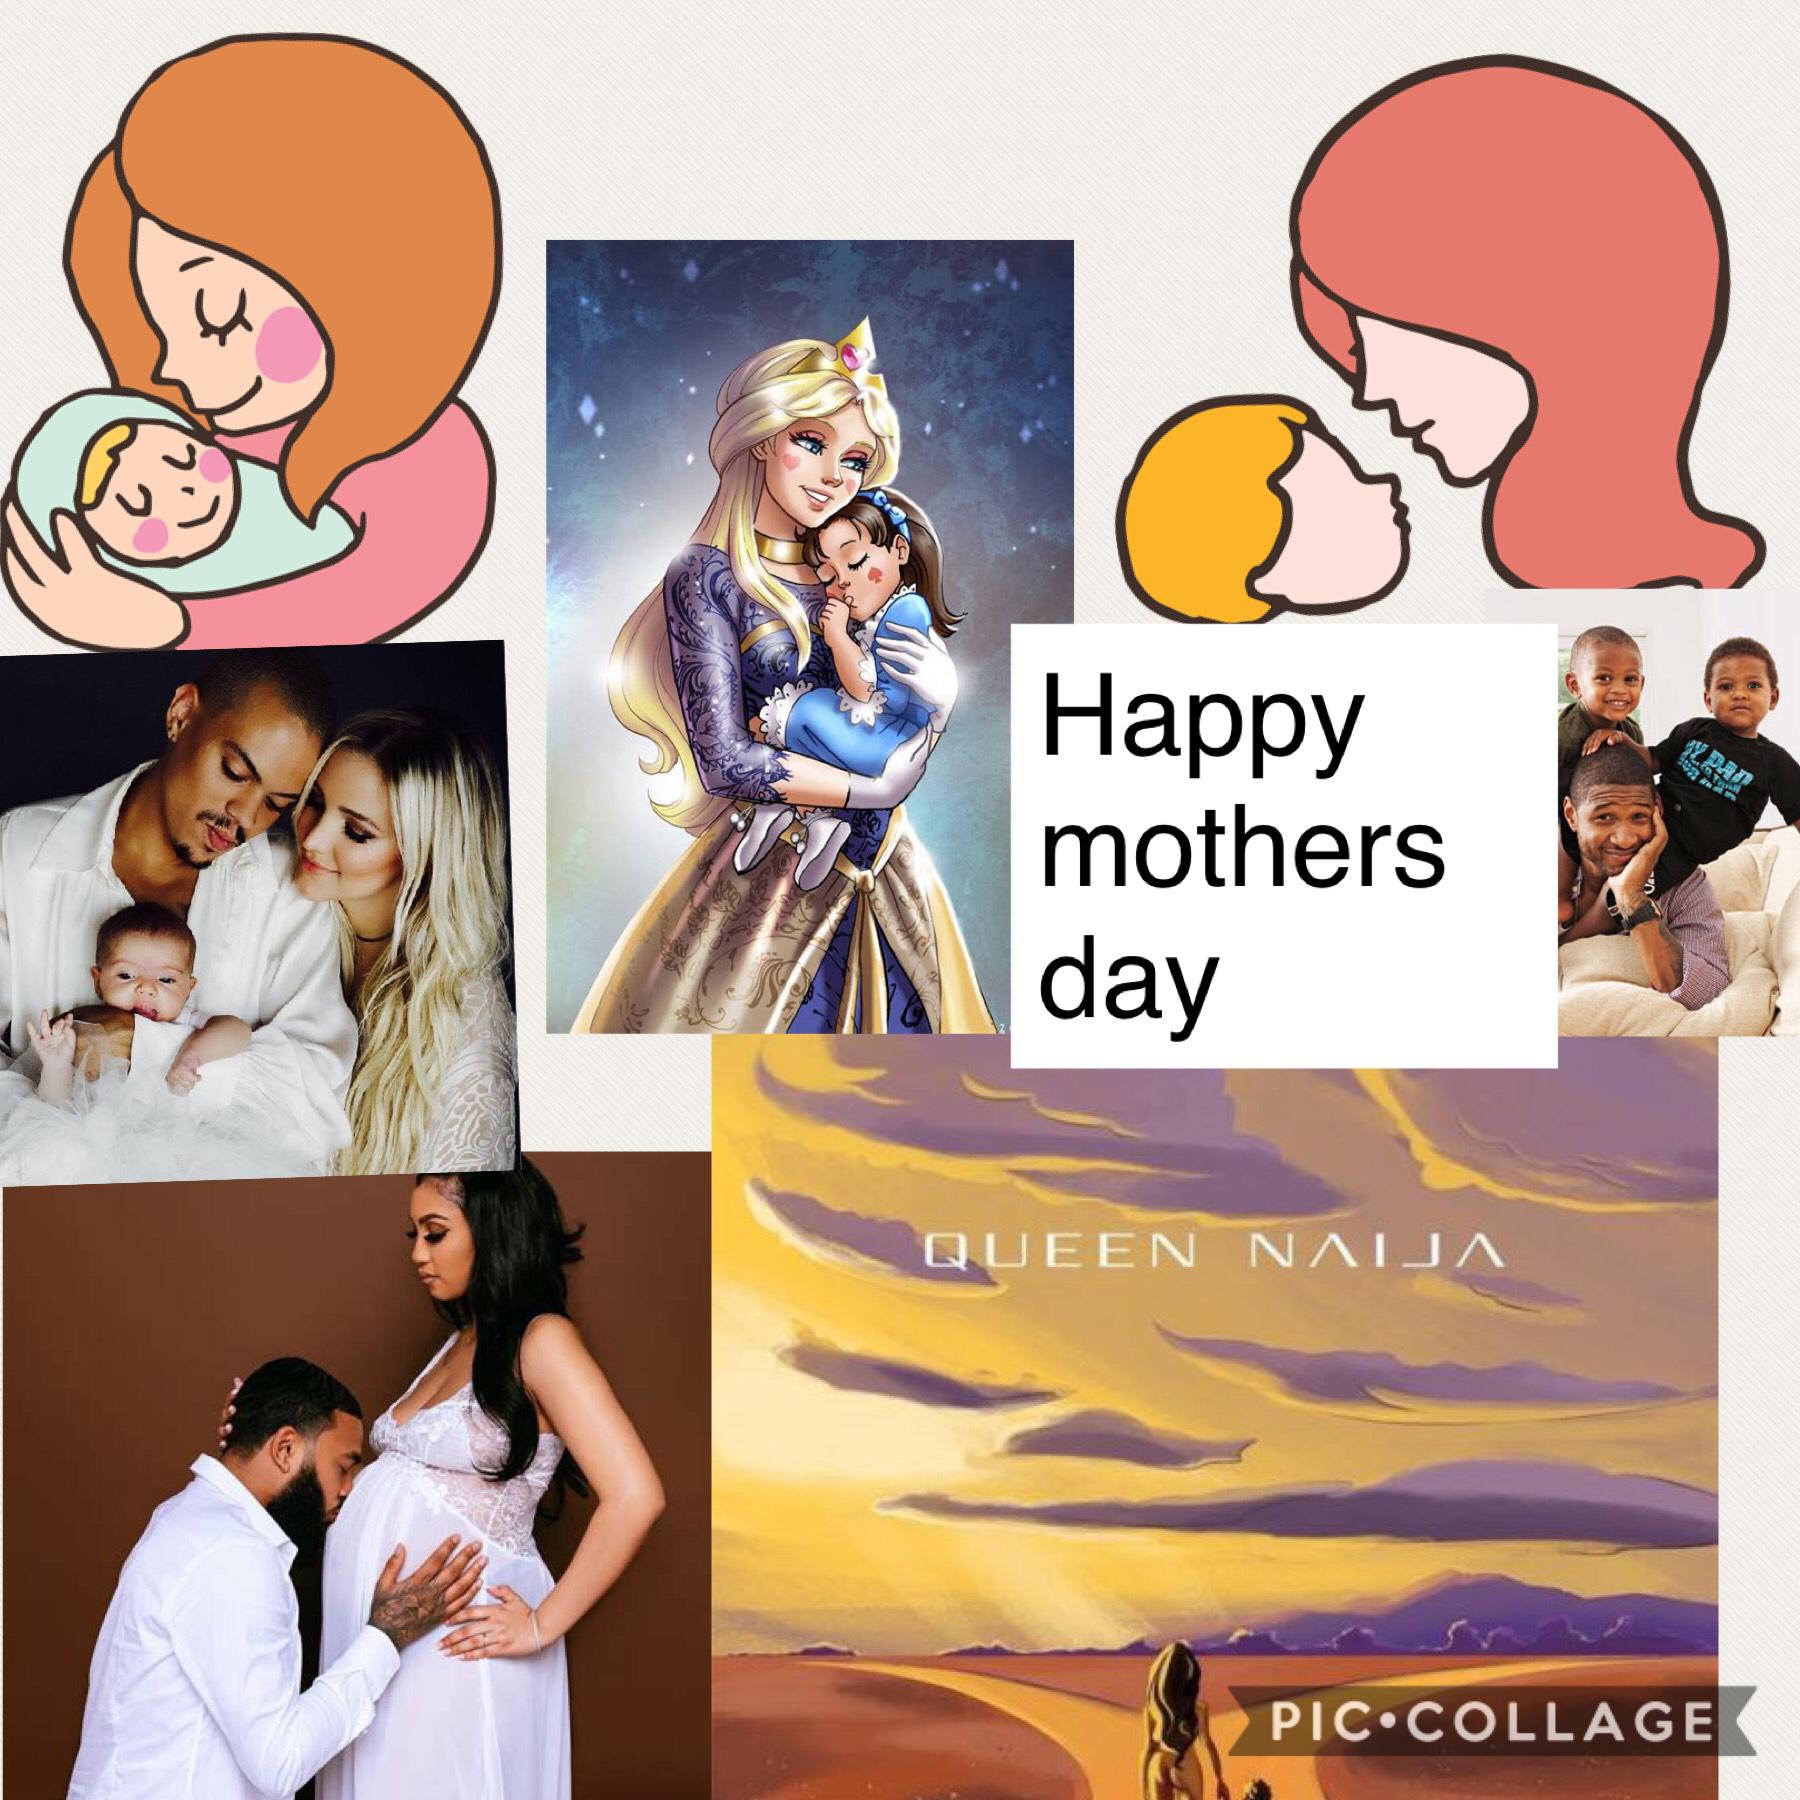 Happy mothers day👩‍👦